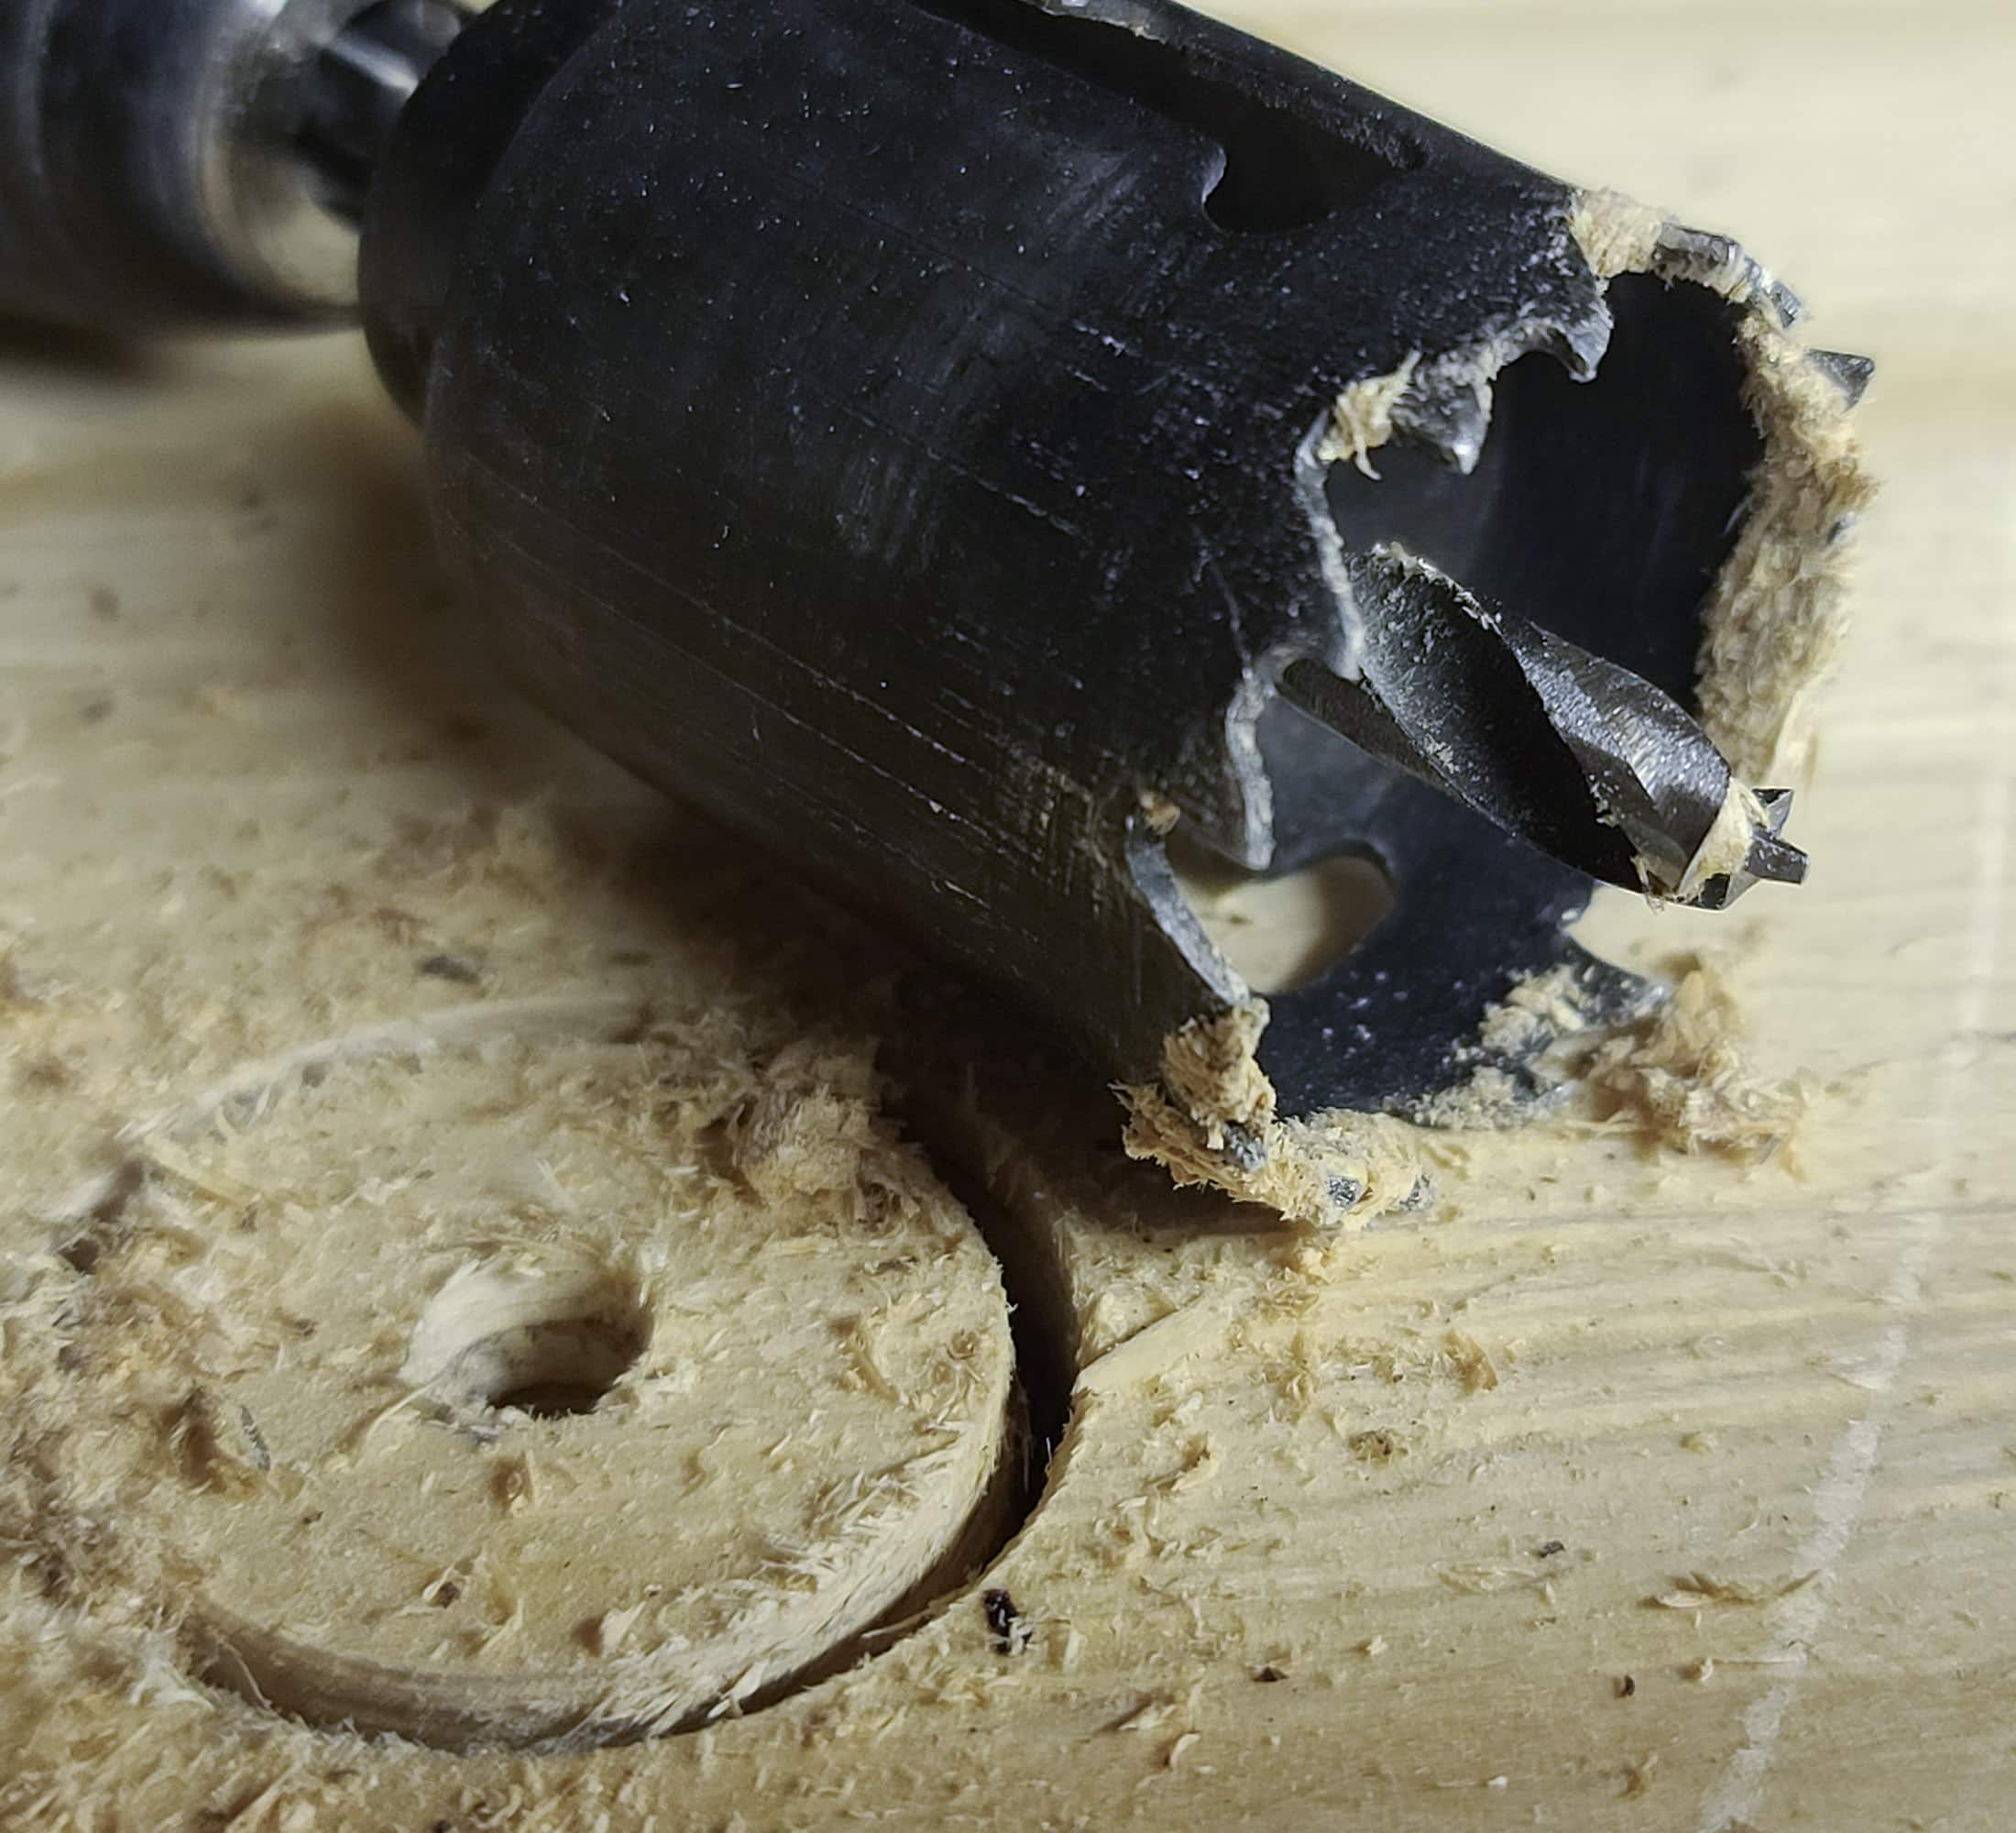 A closeup of a hole saw on a board. The hole saw has sawdust stuck to the teeth. The board has a hole partially cut out.